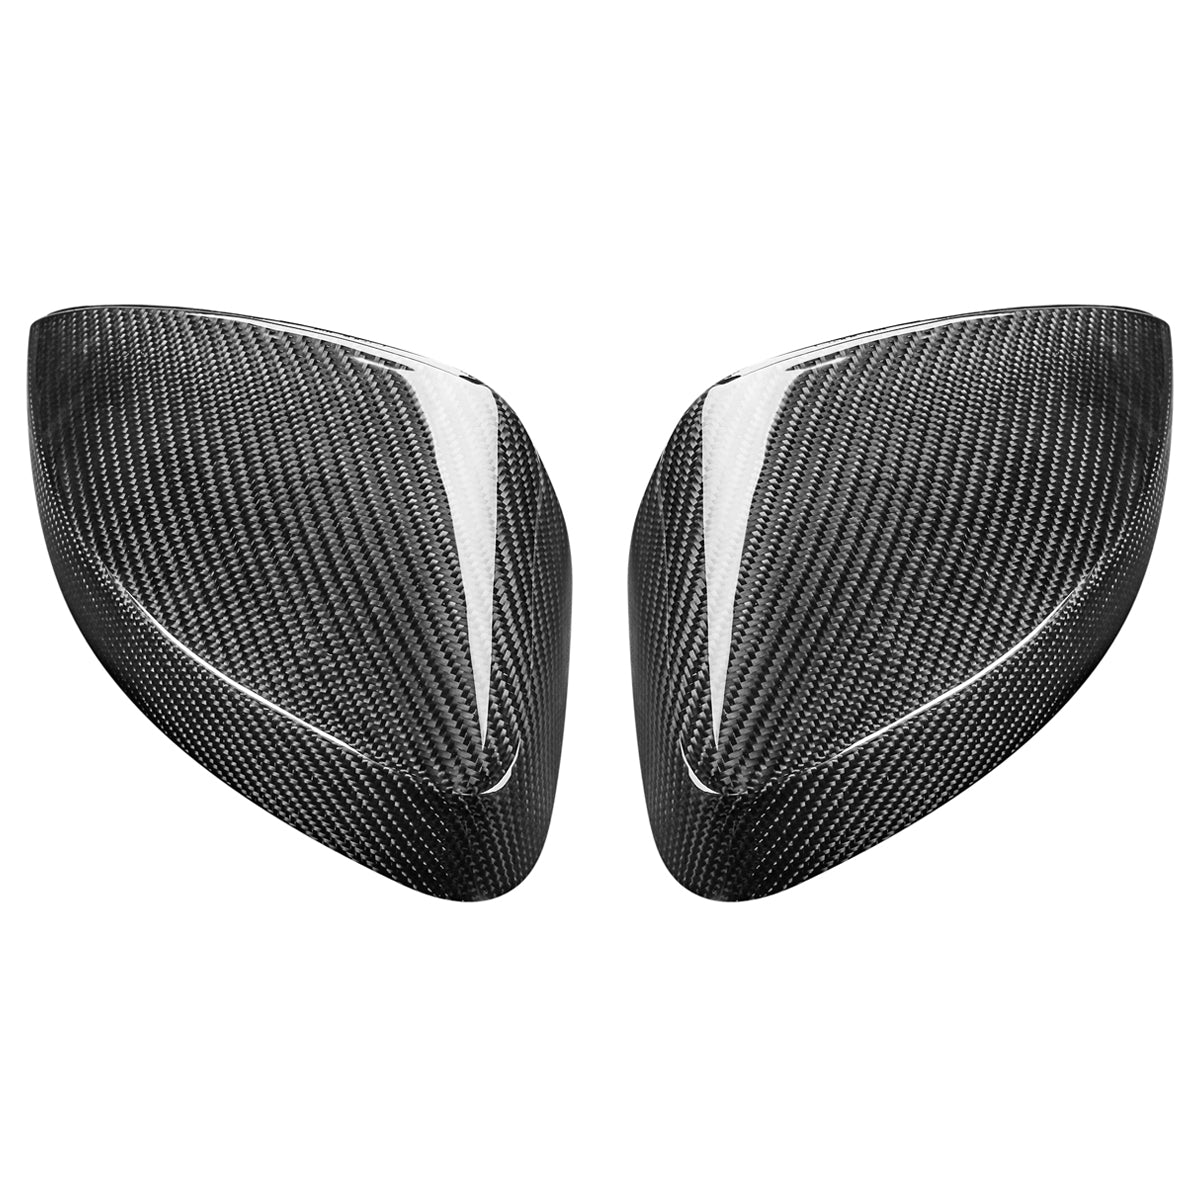 Dark Slate Gray Real Carbon Fiber Side Car Mirror Replacement Caps Cover for AUDI A3 S3 RS3